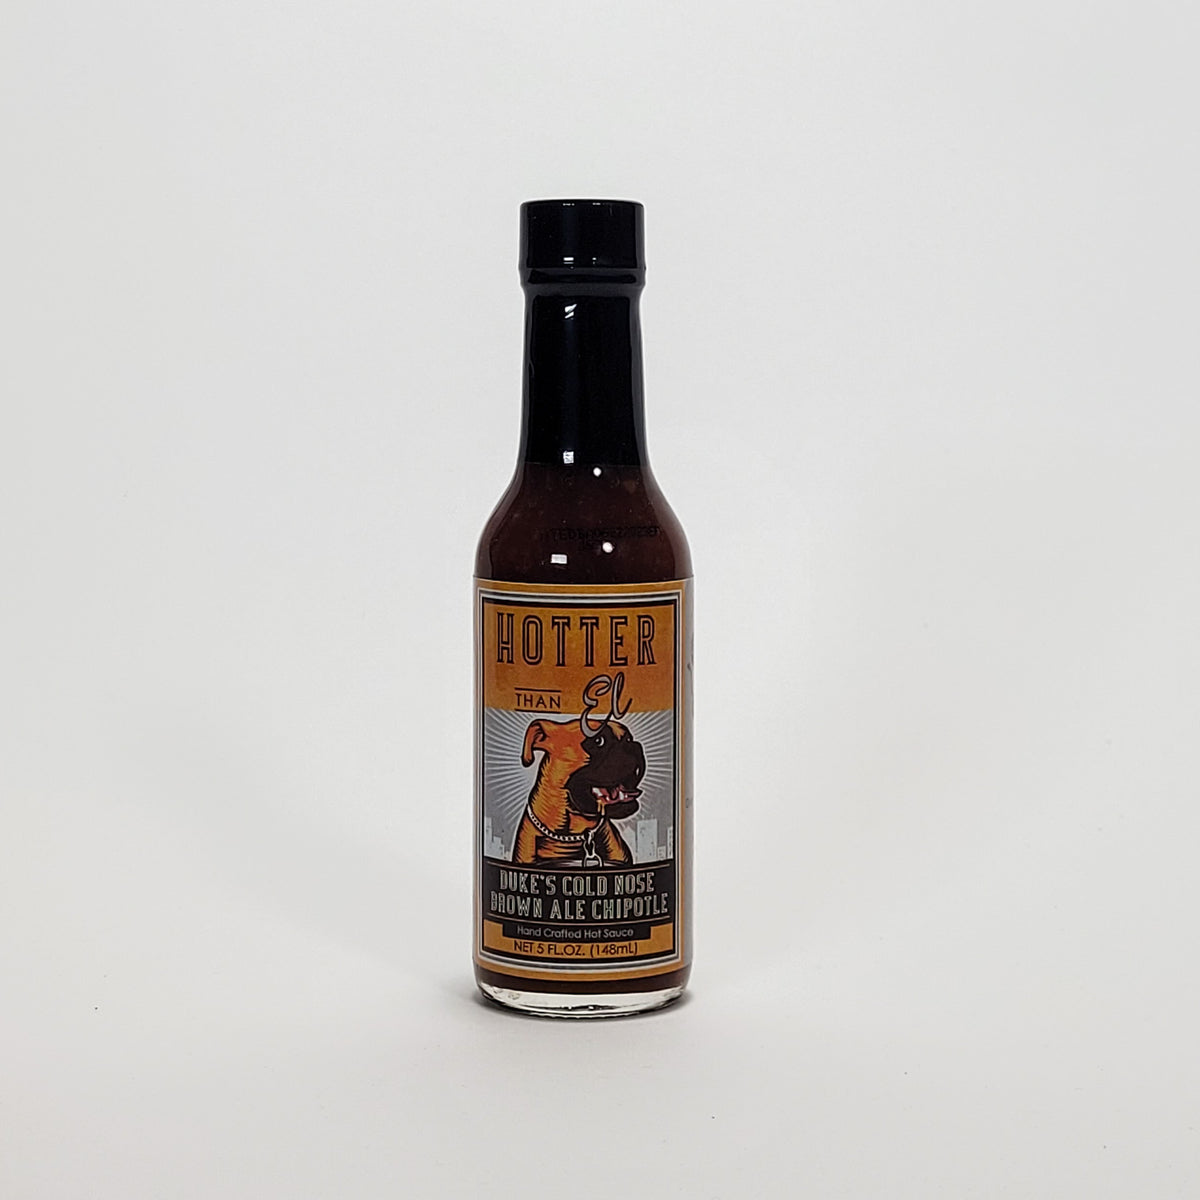 Hotter Than El Duke&#39;s Cold Nose Brown Ale Chipotle hot sauce